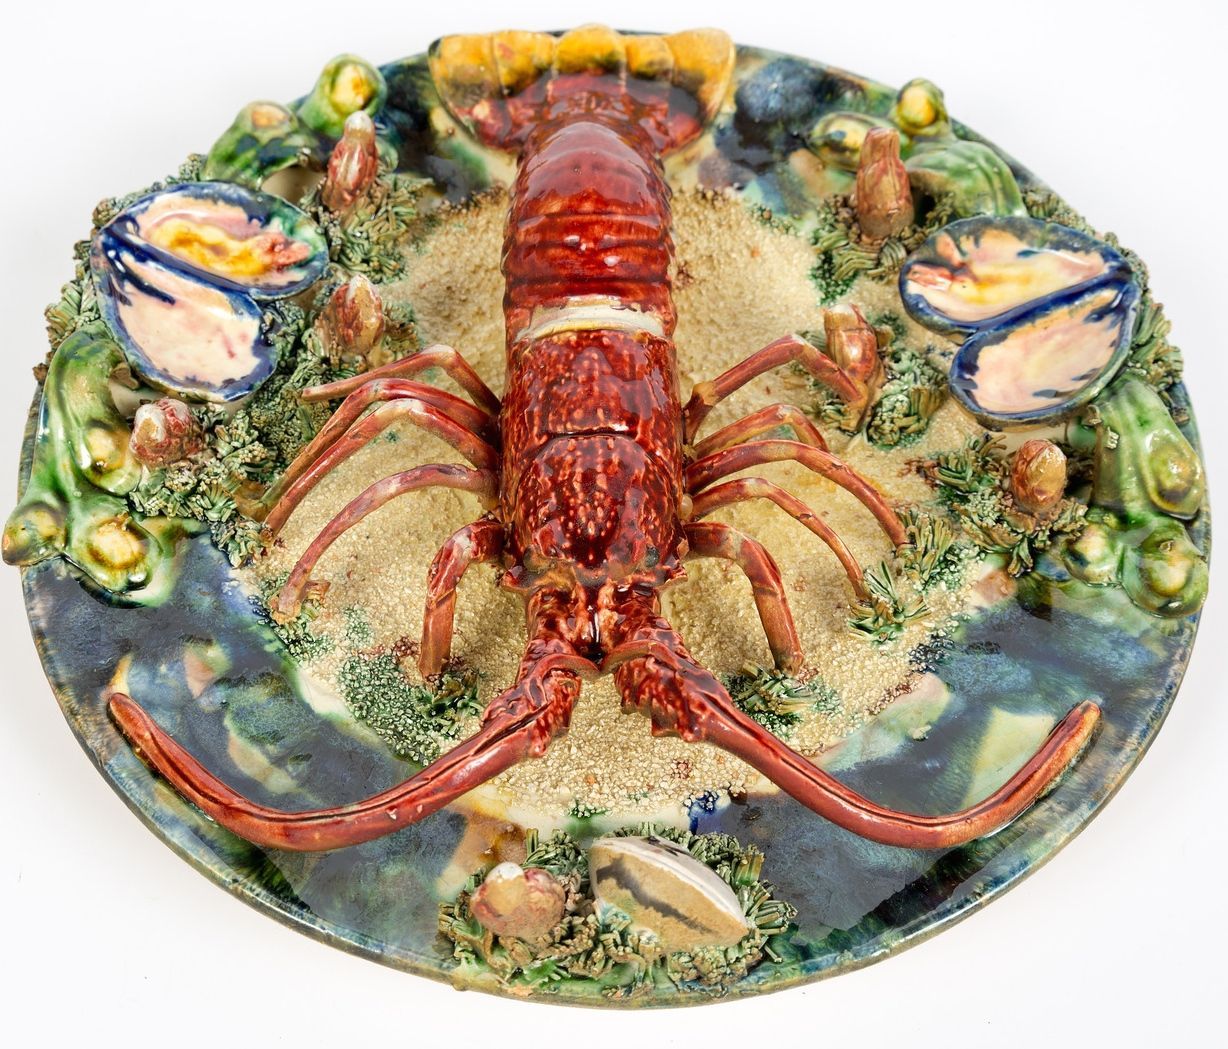 Very collectible Palissy style majolica langouste (spiny or rock lobster) plate. Portuguese trompe-l'oeil platter features a bright red langouste on a textured and mottled ground of sand, mussels, seaweed and shells. Impressed marks on the reverse.